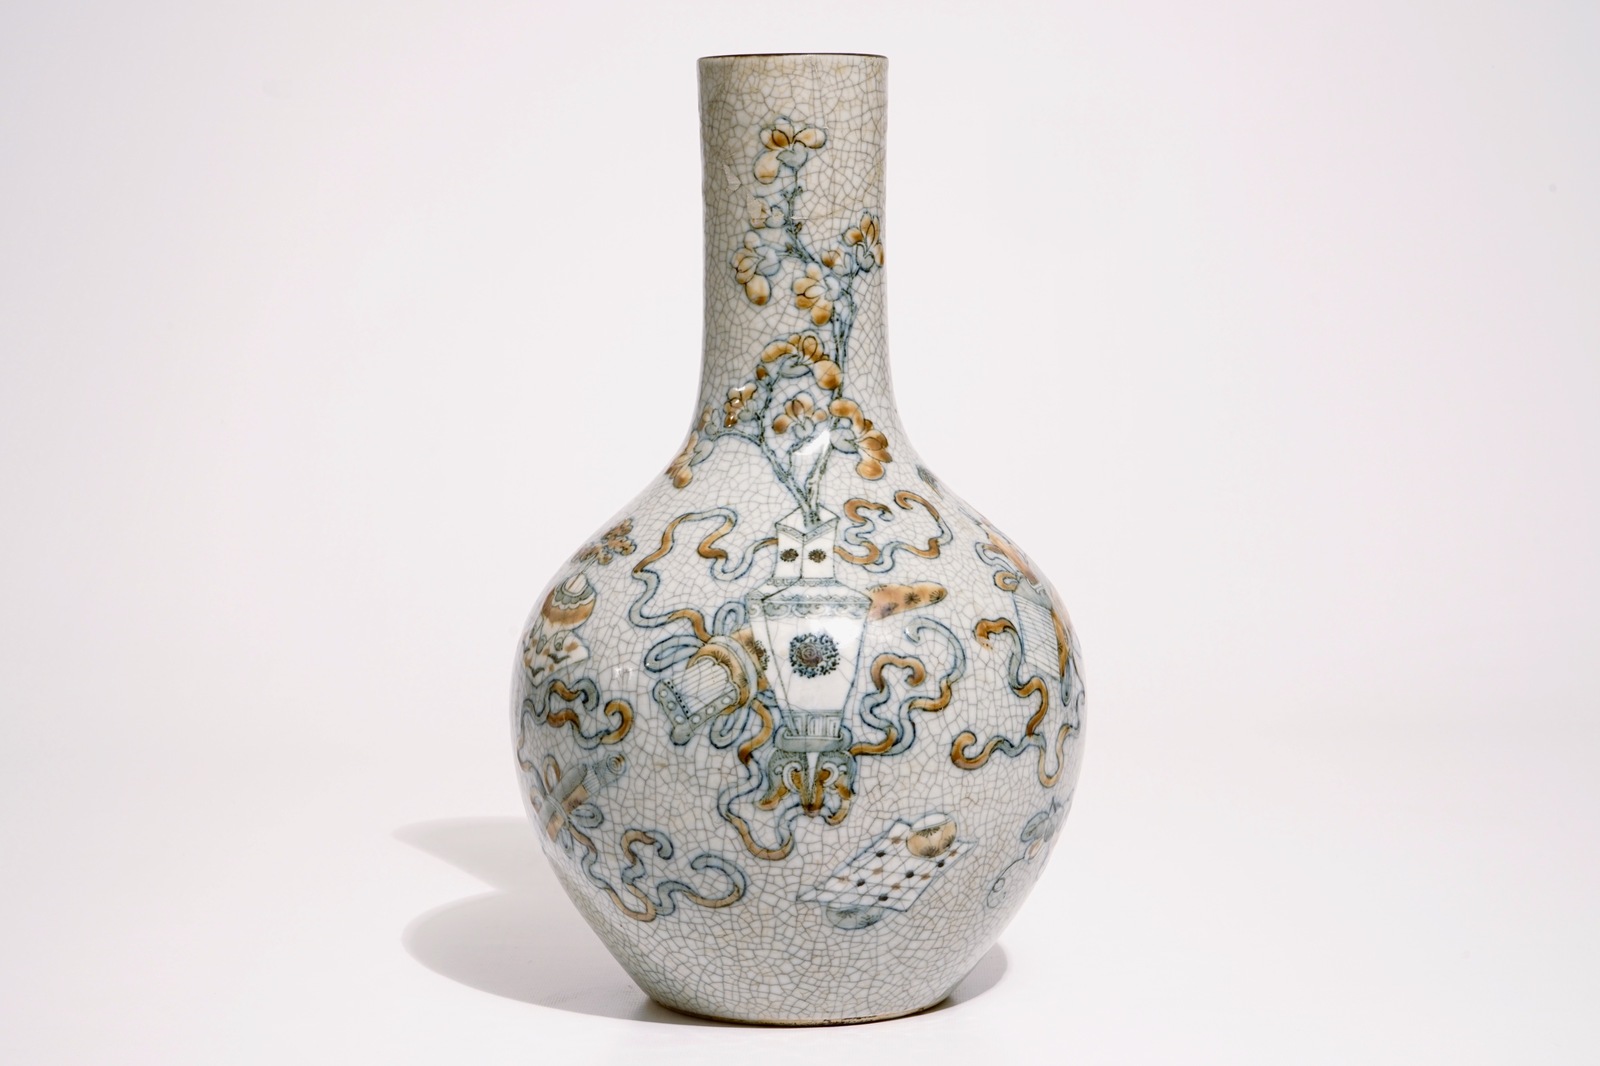 A Chinese crackle glaze tianqiuping vase with antiquities design, 19th C. H.: 43 cm Condition